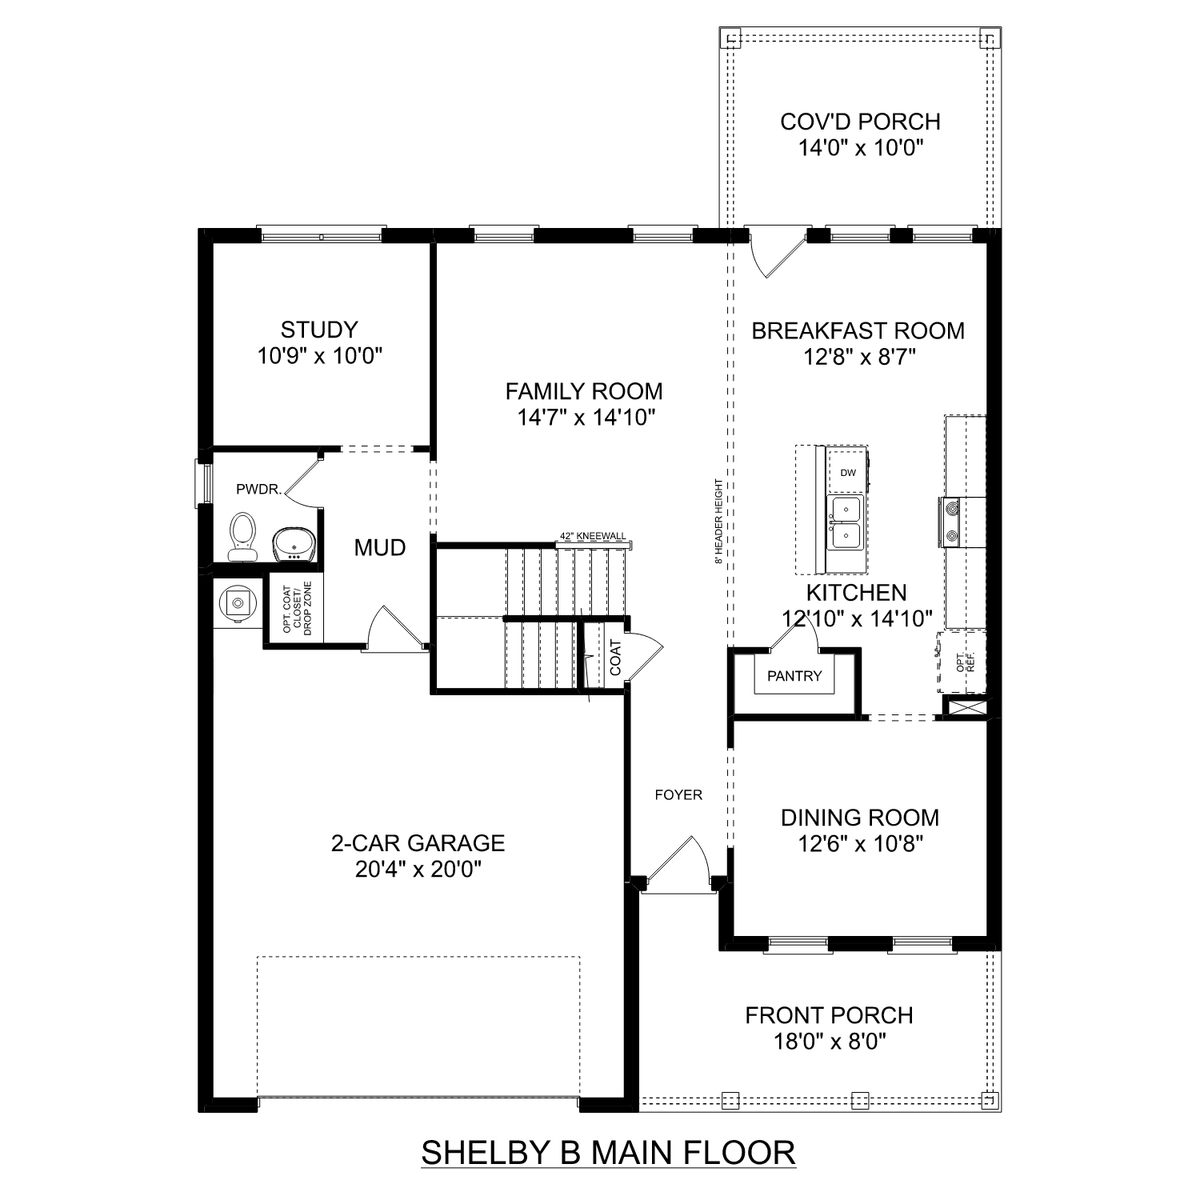 1 - The Shelby B floor plan layout for 111 Wilcot Road in Davidson Homes' Walker's Hill community.